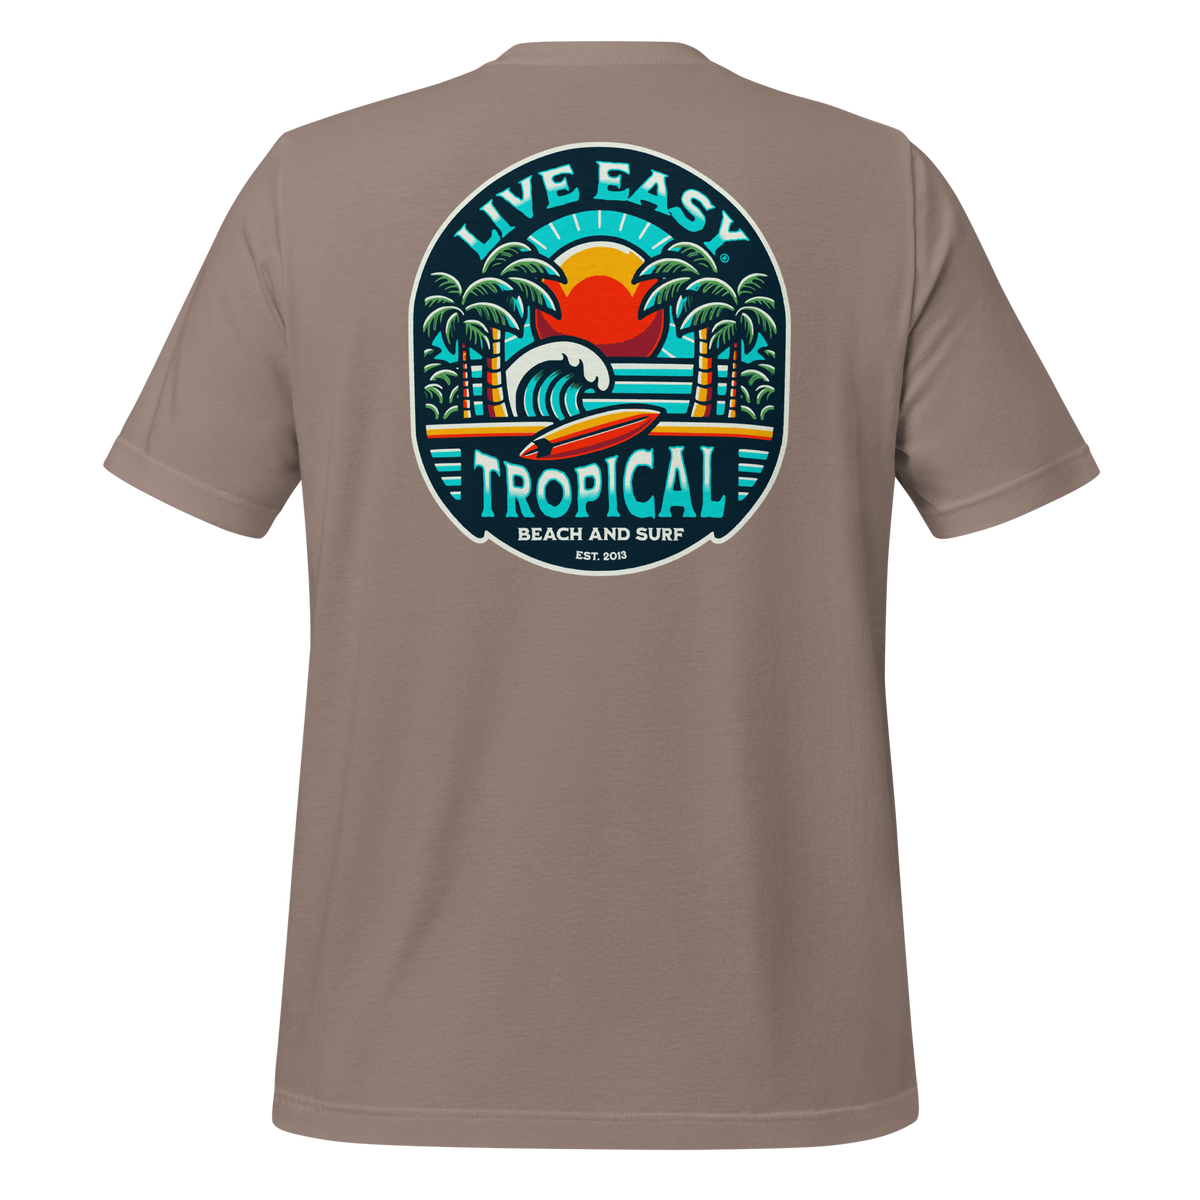 Live Easy® Tropical Beach and Surf Tee